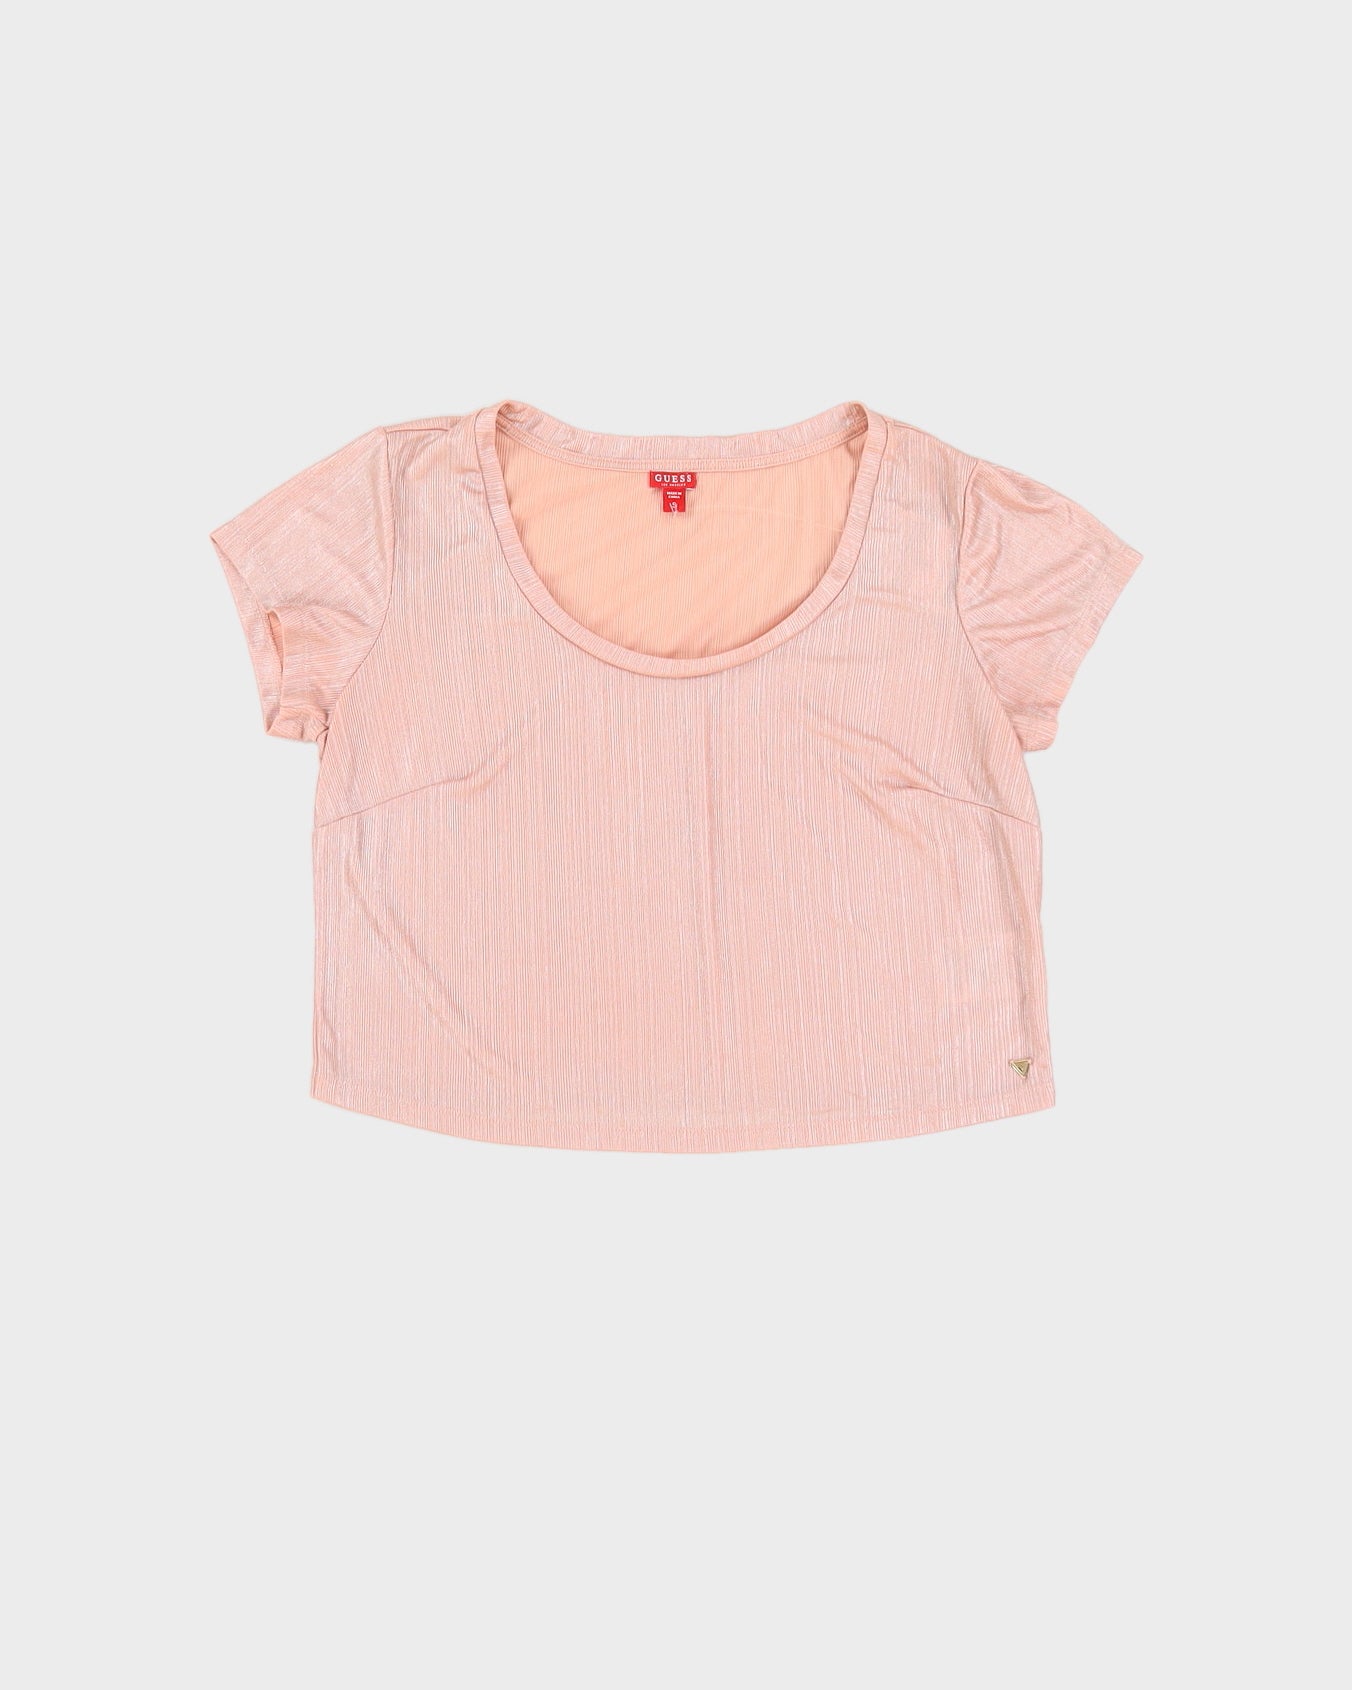 Y2K Guess Pink Short Sleeve Top - S